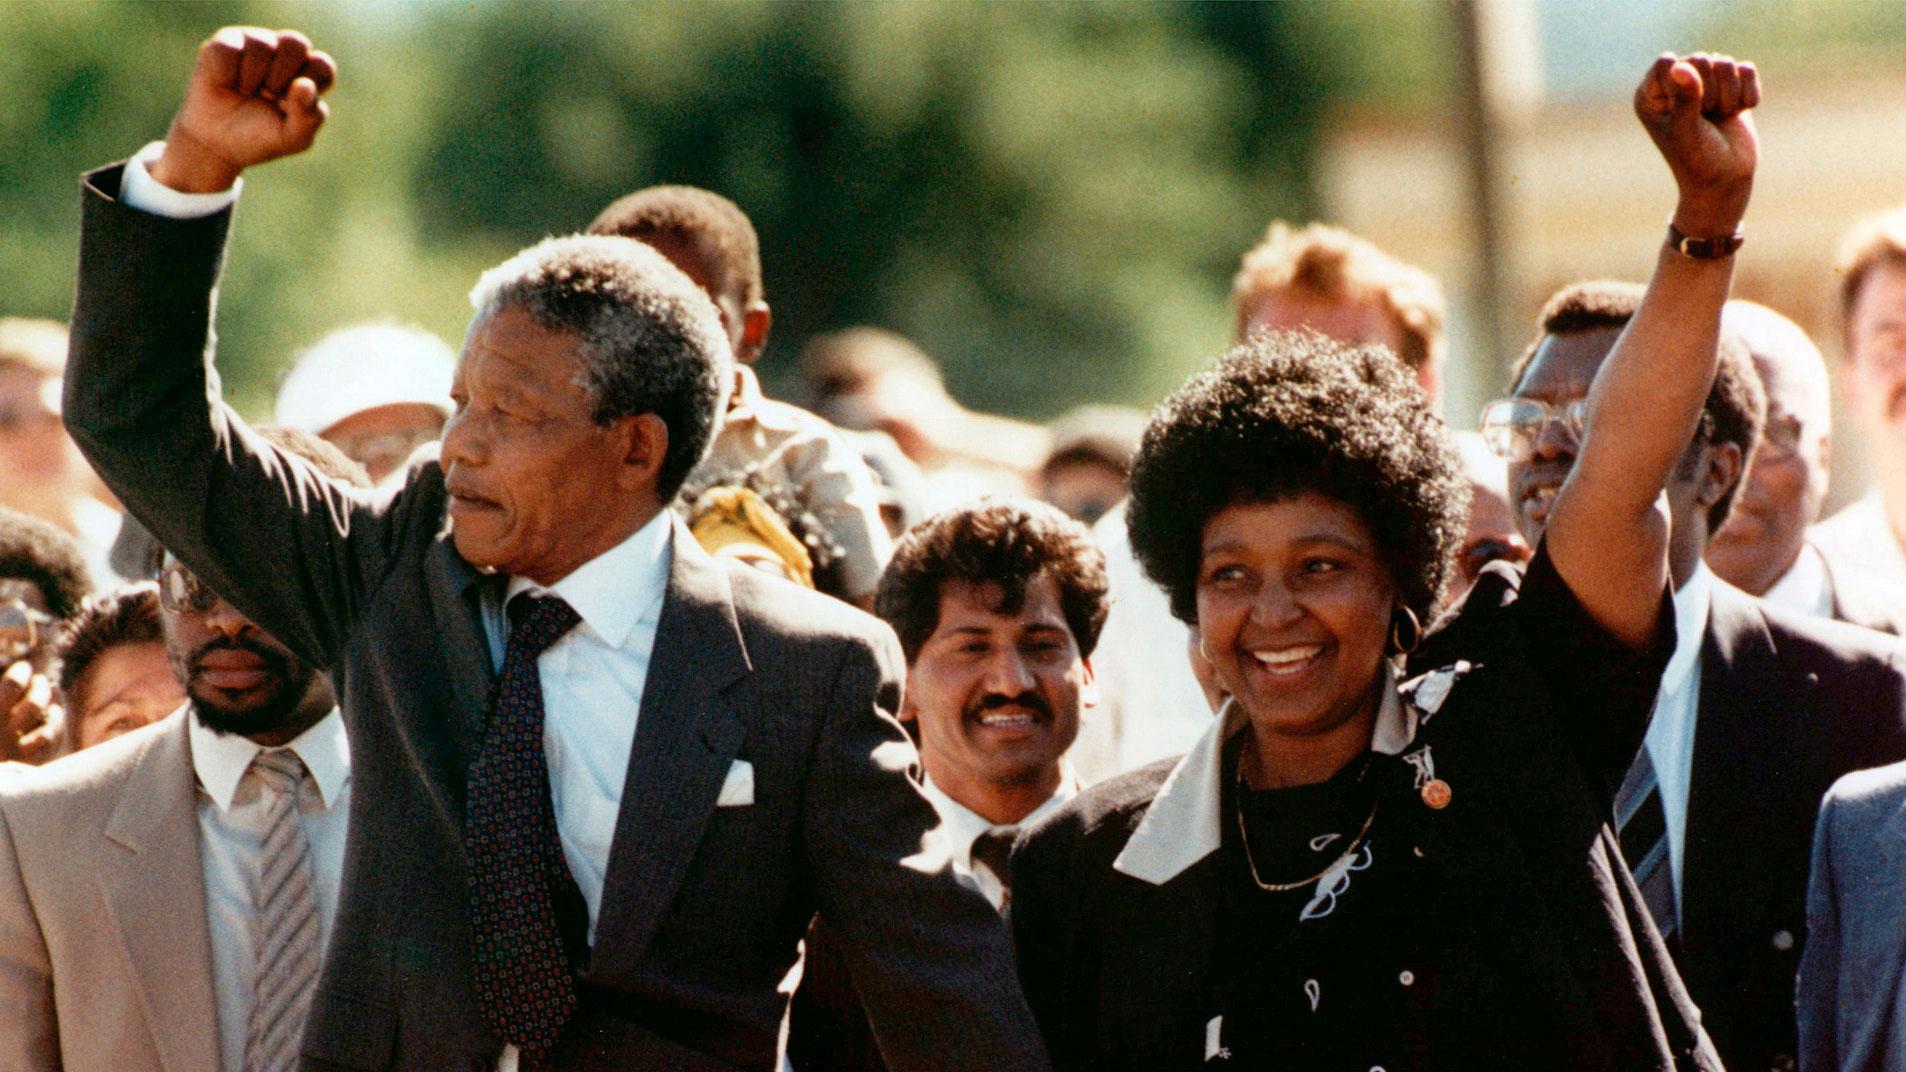 Nelson Mandela, left, and his wife Winnie, raise clenched fists as they walk hand-in-hand from the Victor Verster prison near Cape Town, South Africa on Feb. 11, 1990.